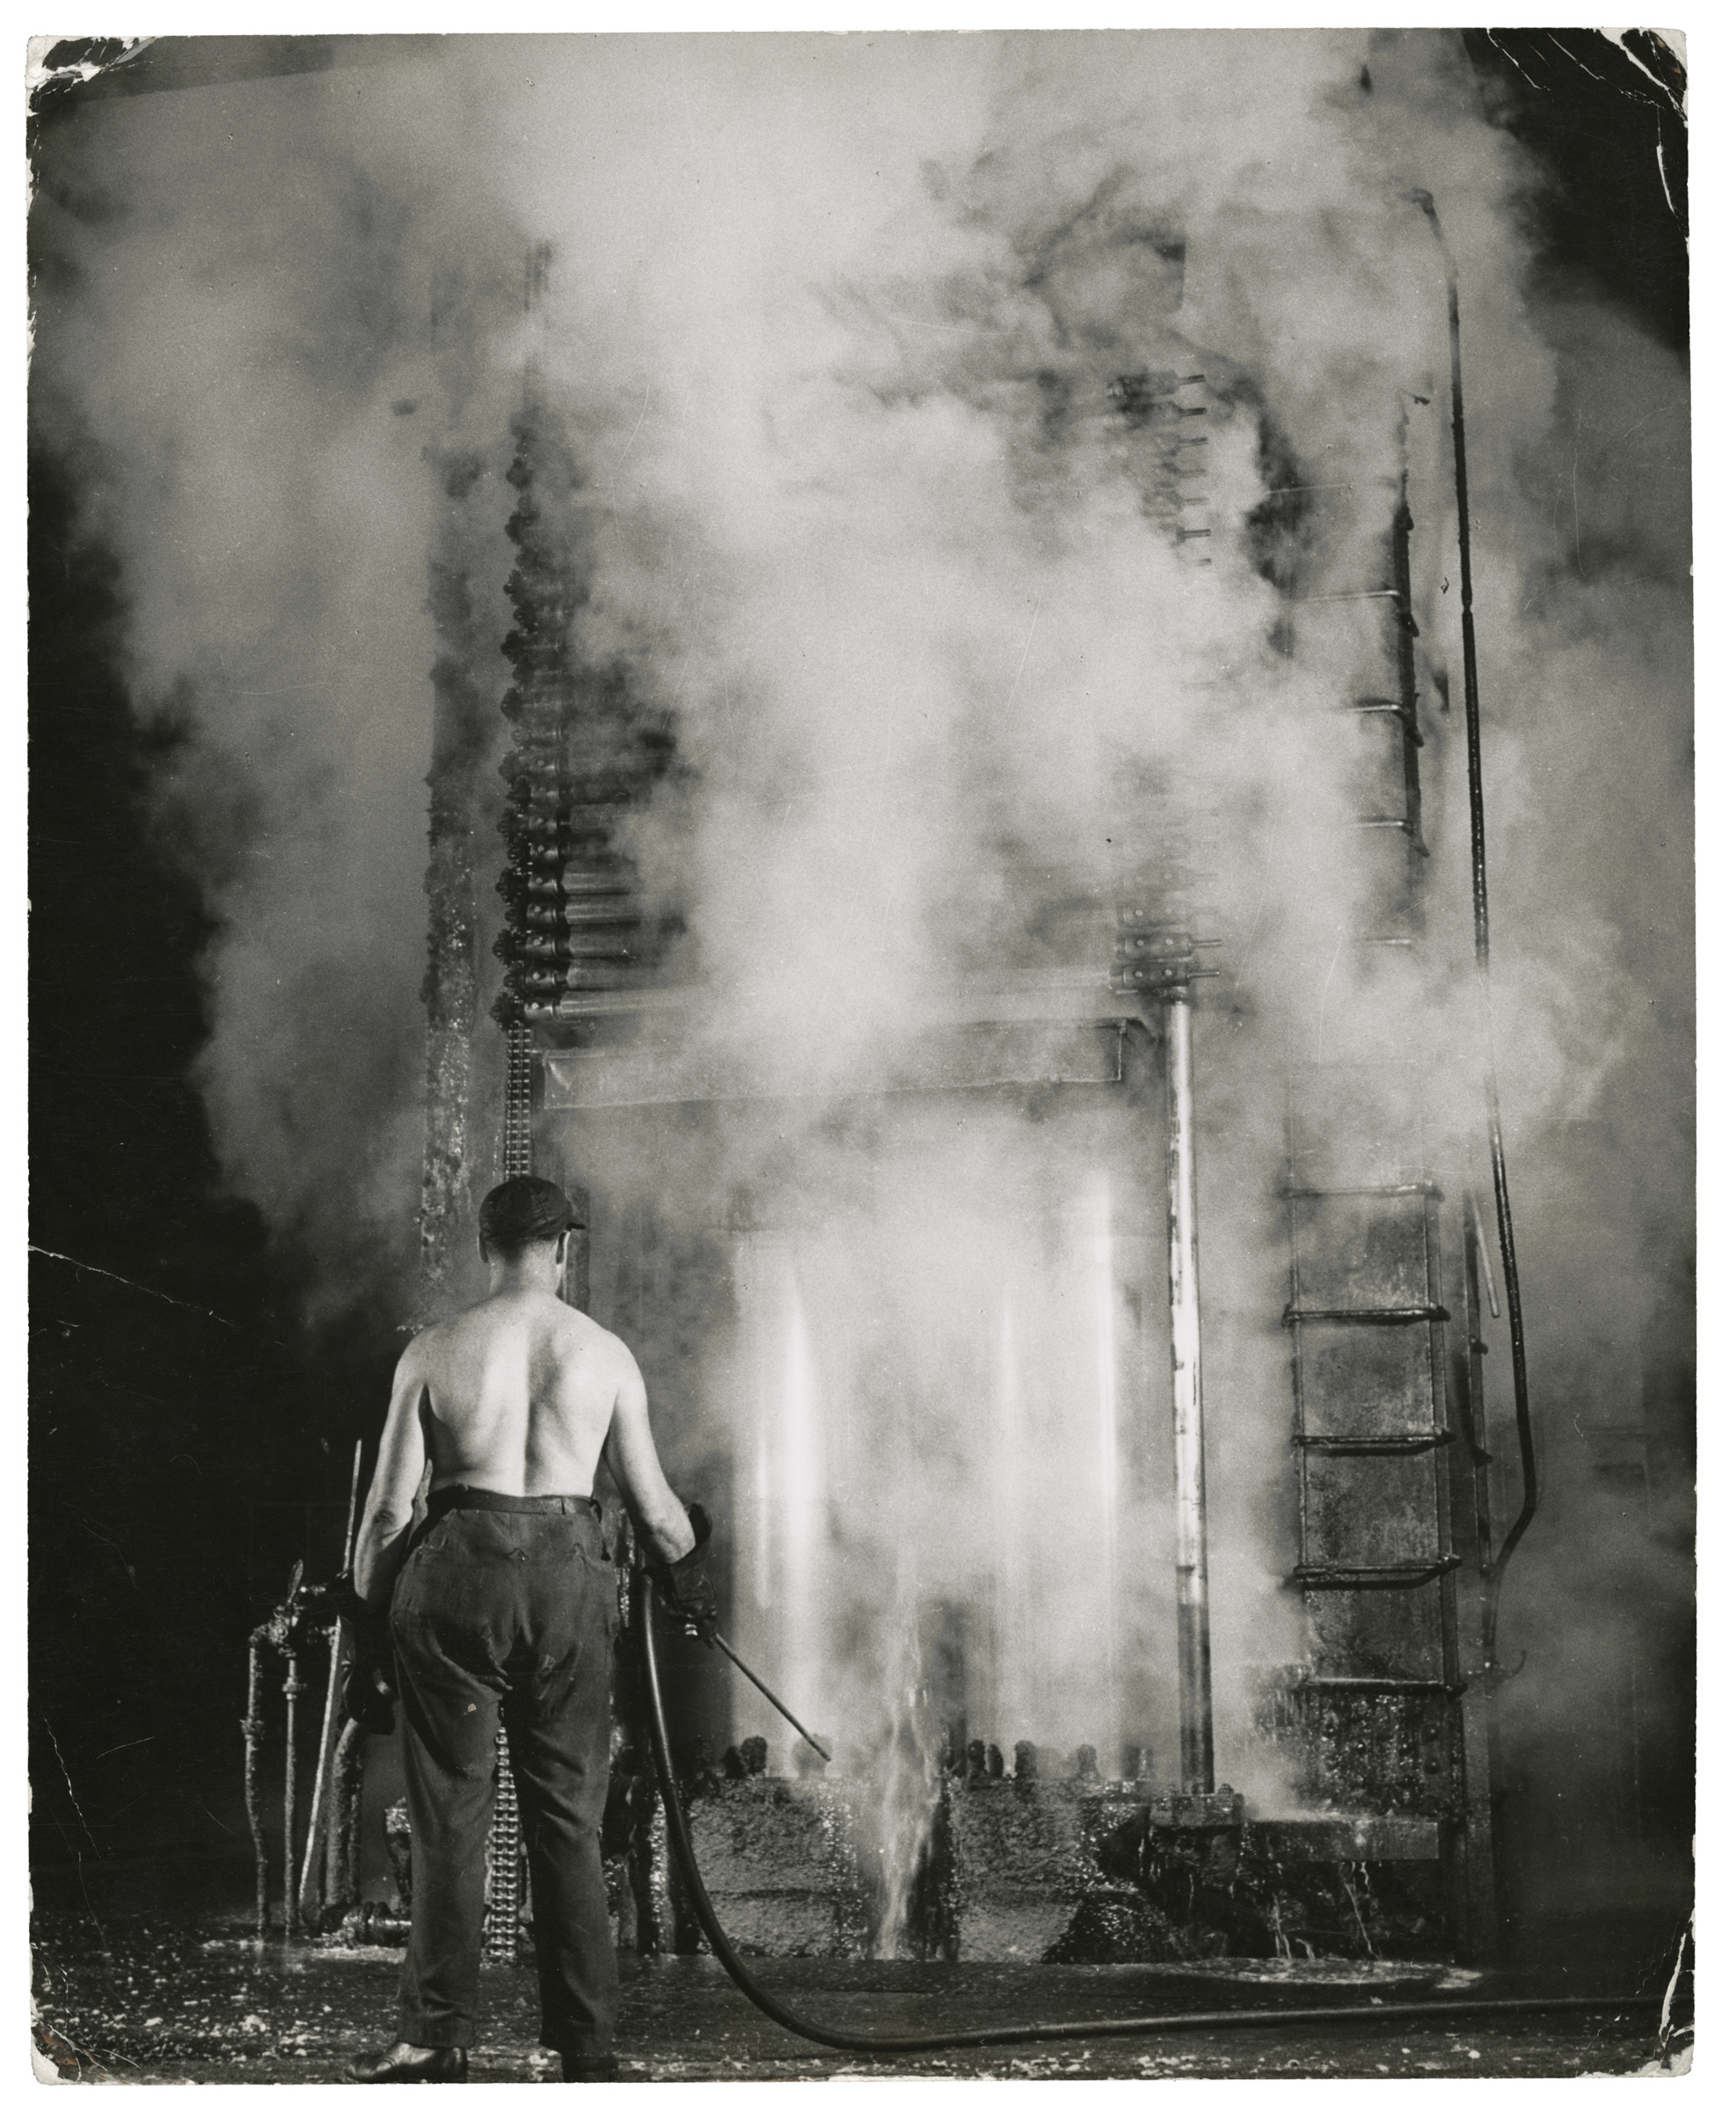 Werner Wolff, Untitled [Foundry worker], ca. 1955, gelatin silver print. The Black Star Collection, The Image Centre © The Family of Werner Wolff